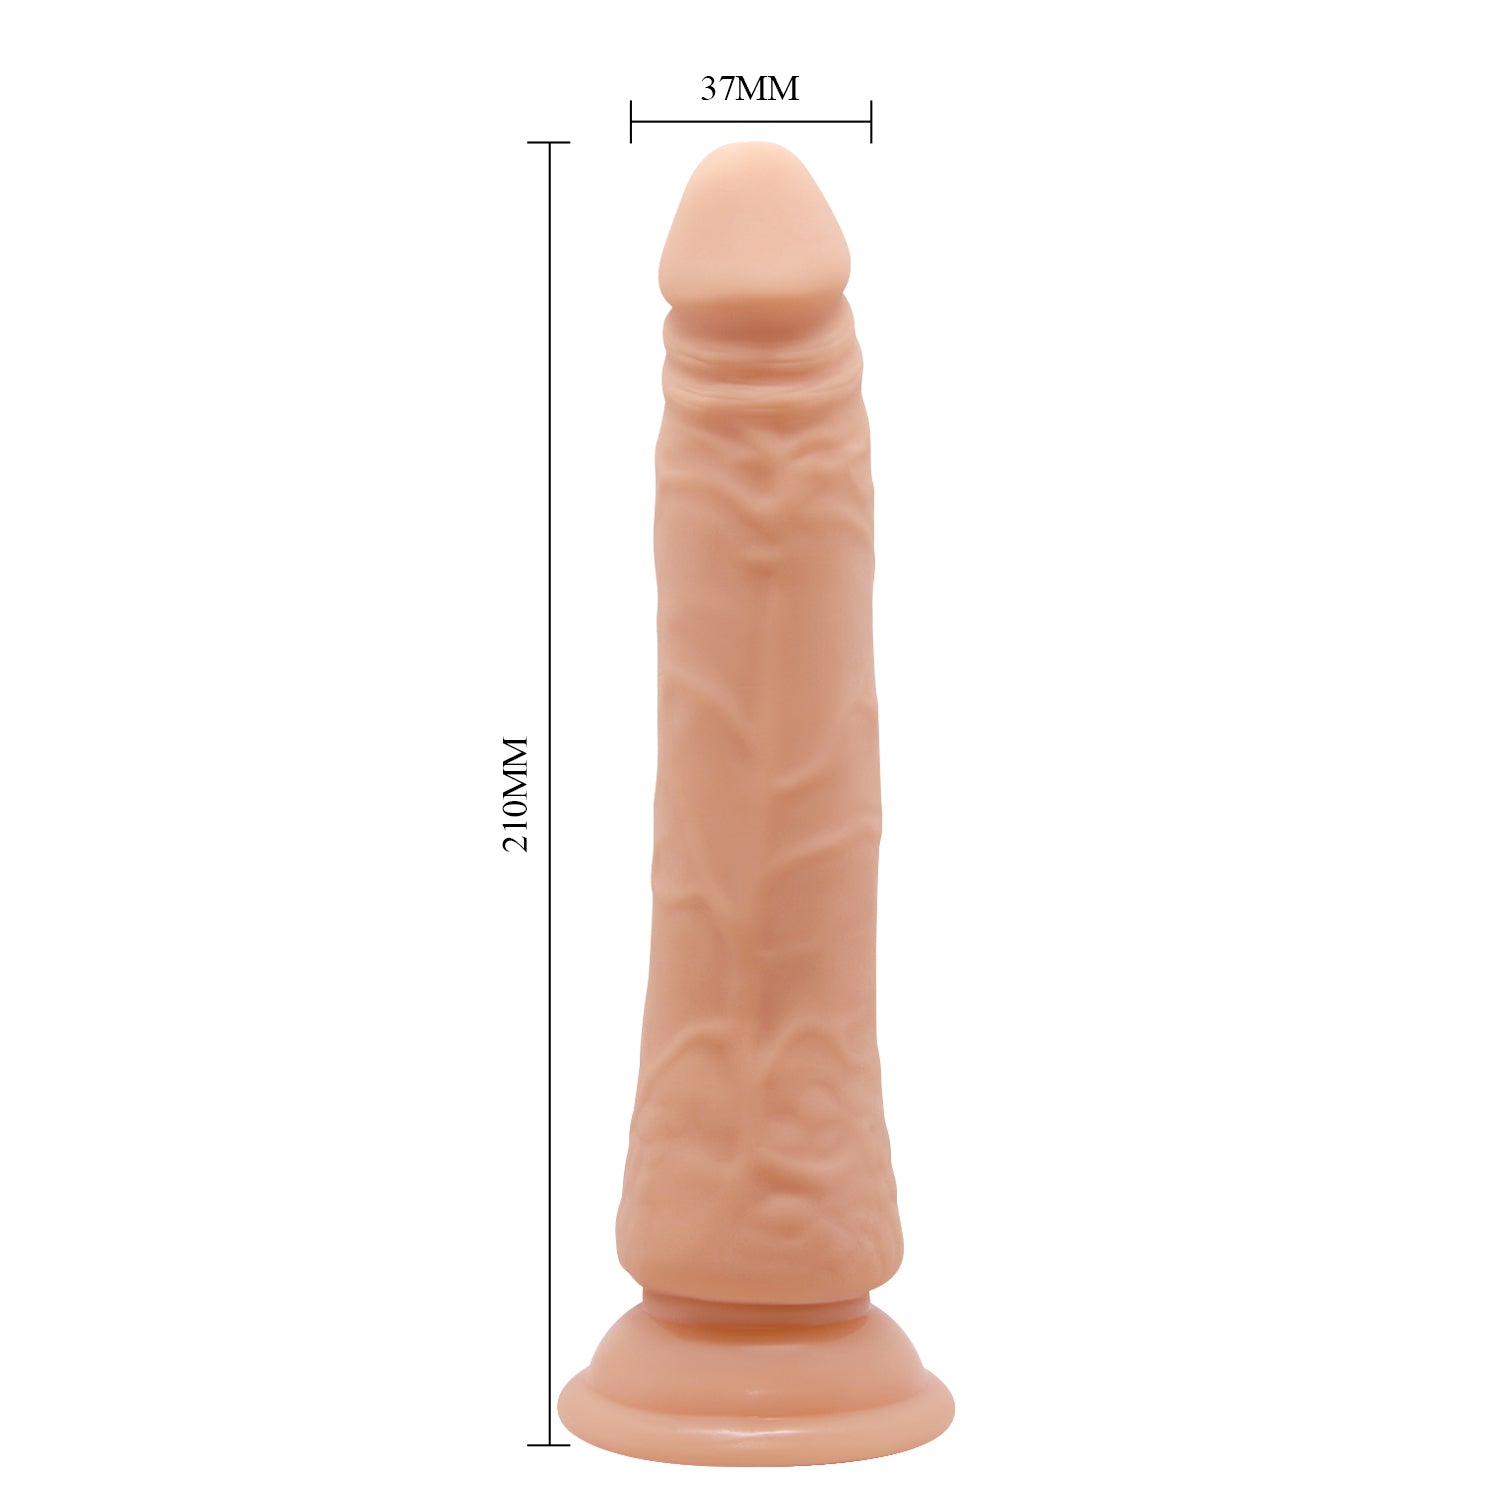 Baile 8.3 Inch Soft Skin Dildo with Suction Cup